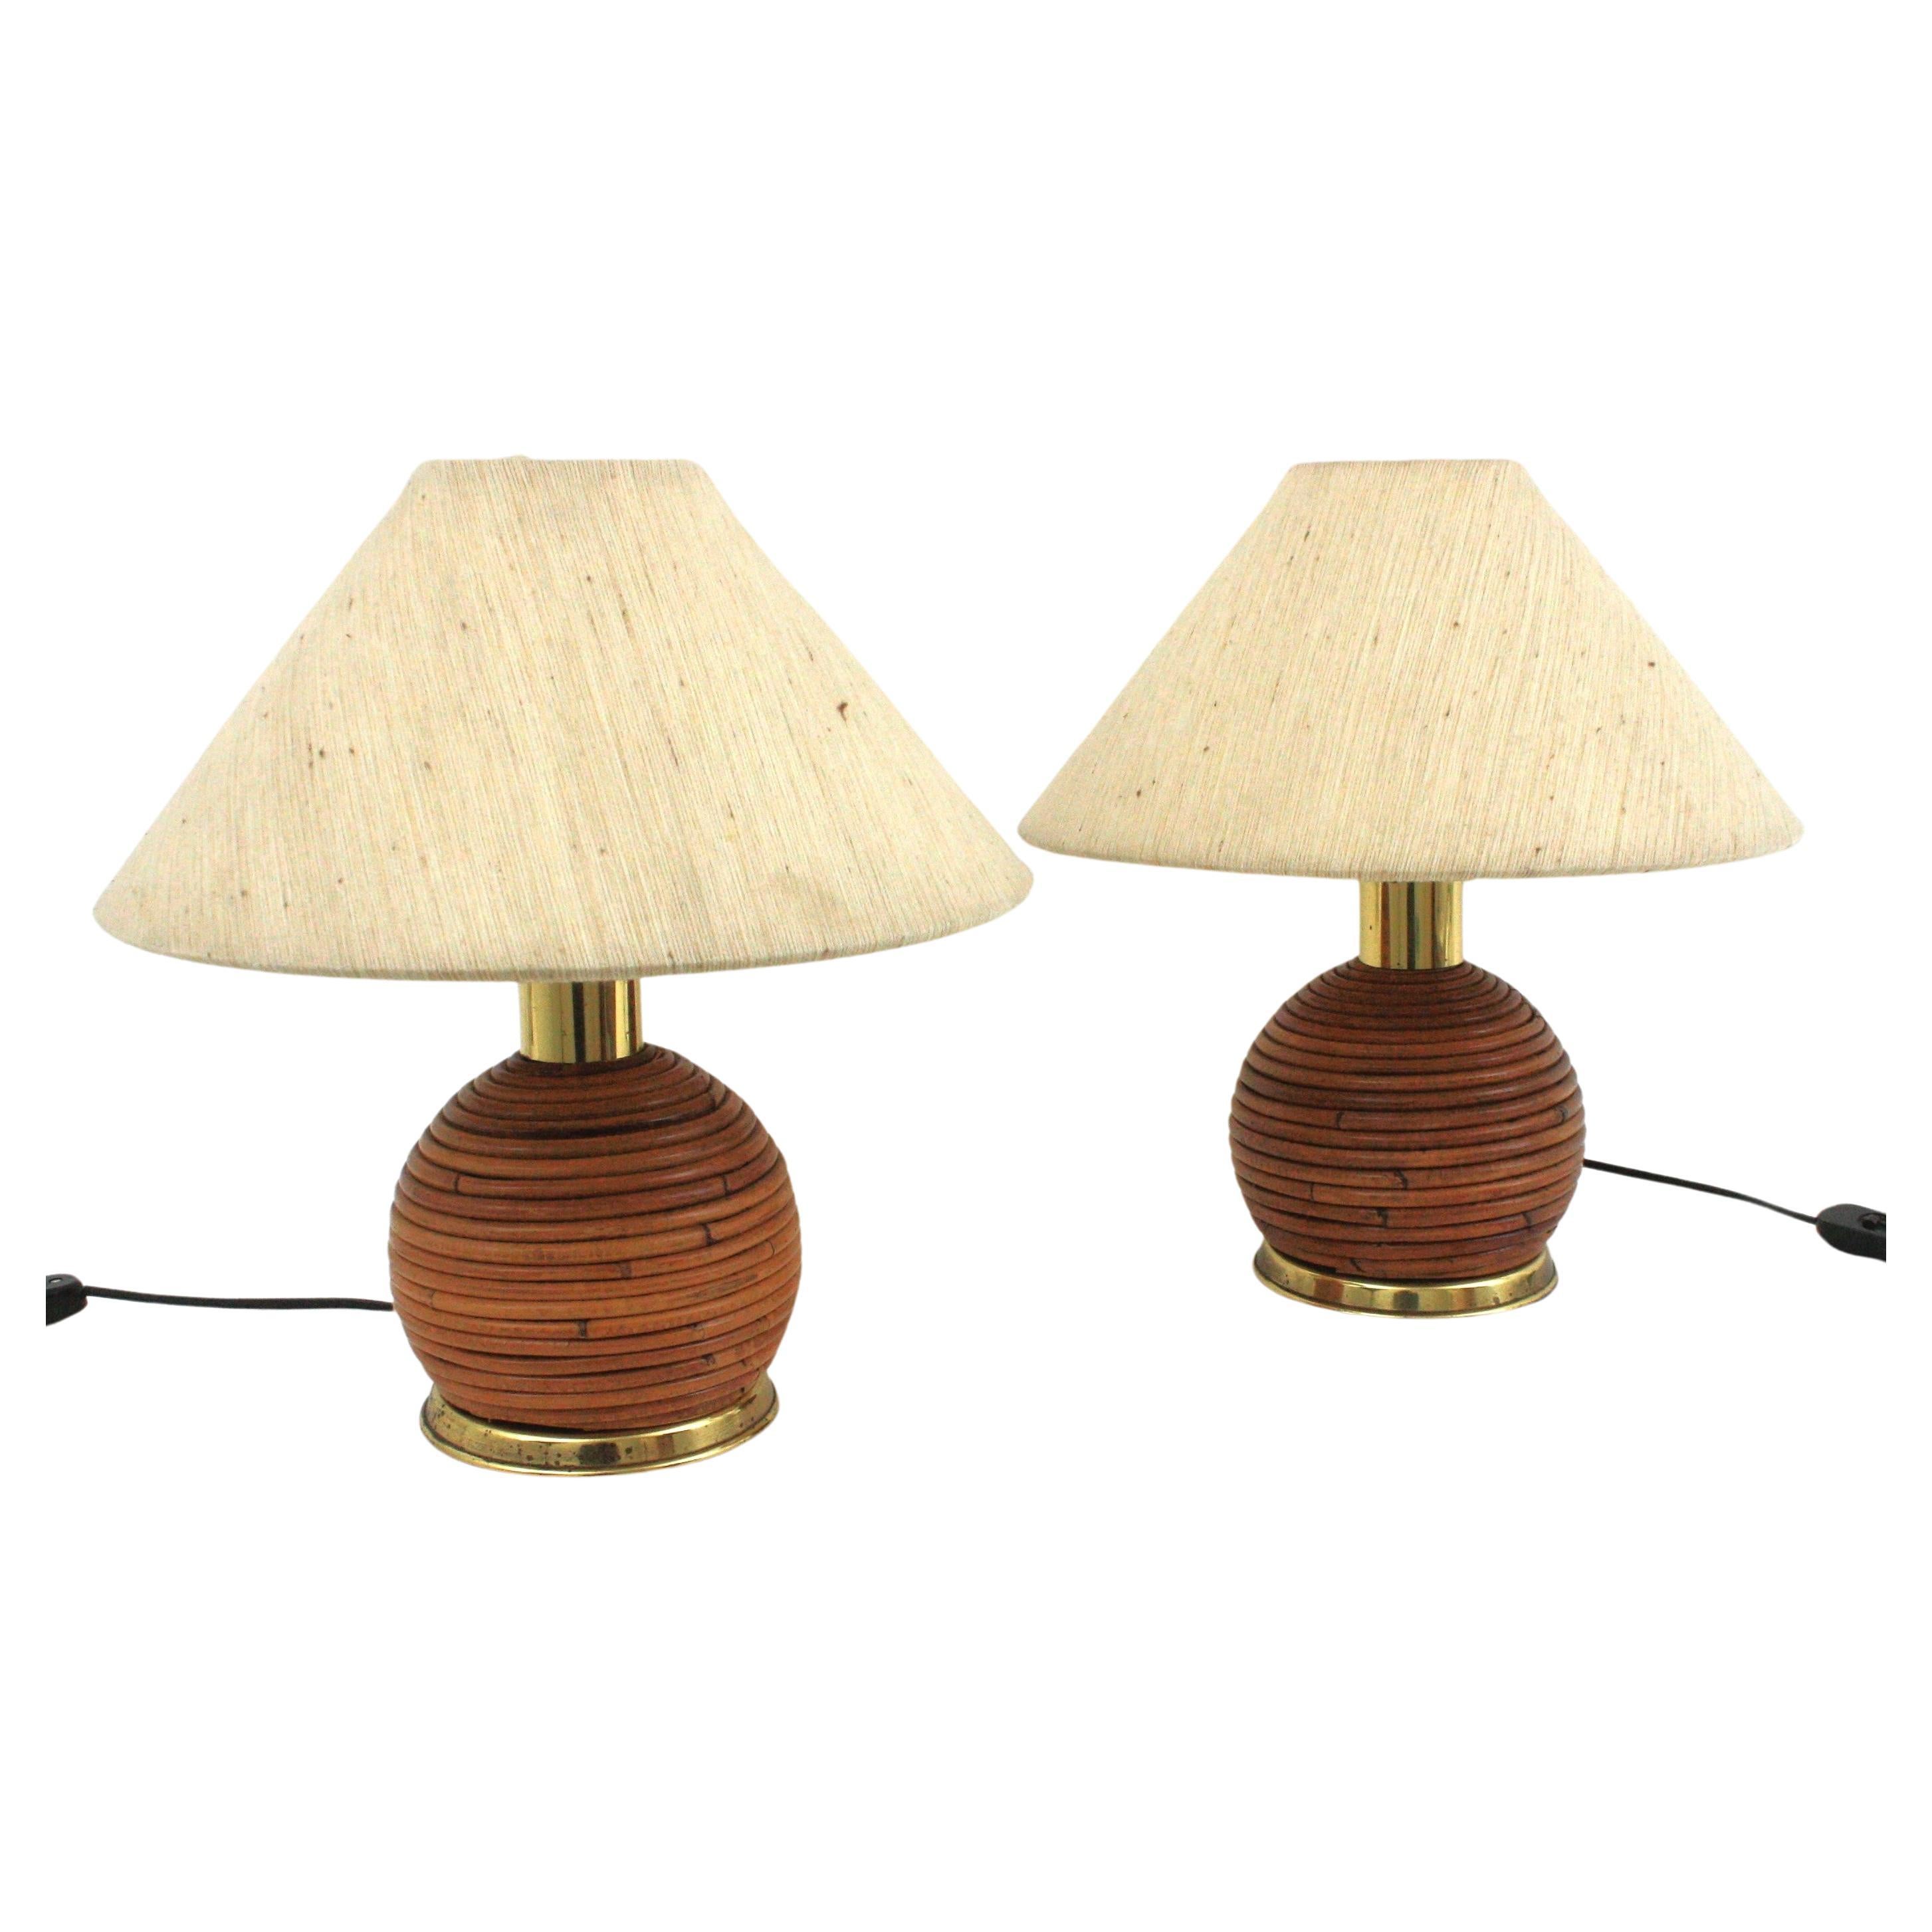 Mid-Century Modern Rattan Pencil Reed Table Lamps with Original Linen Lampshades

Vivai del Sud pair of rattan pencil reed and brass table lamps / bedside table lamps, Italy, 1970s
These Pencil Reed Rattan Organic Modern Table Lamps have a